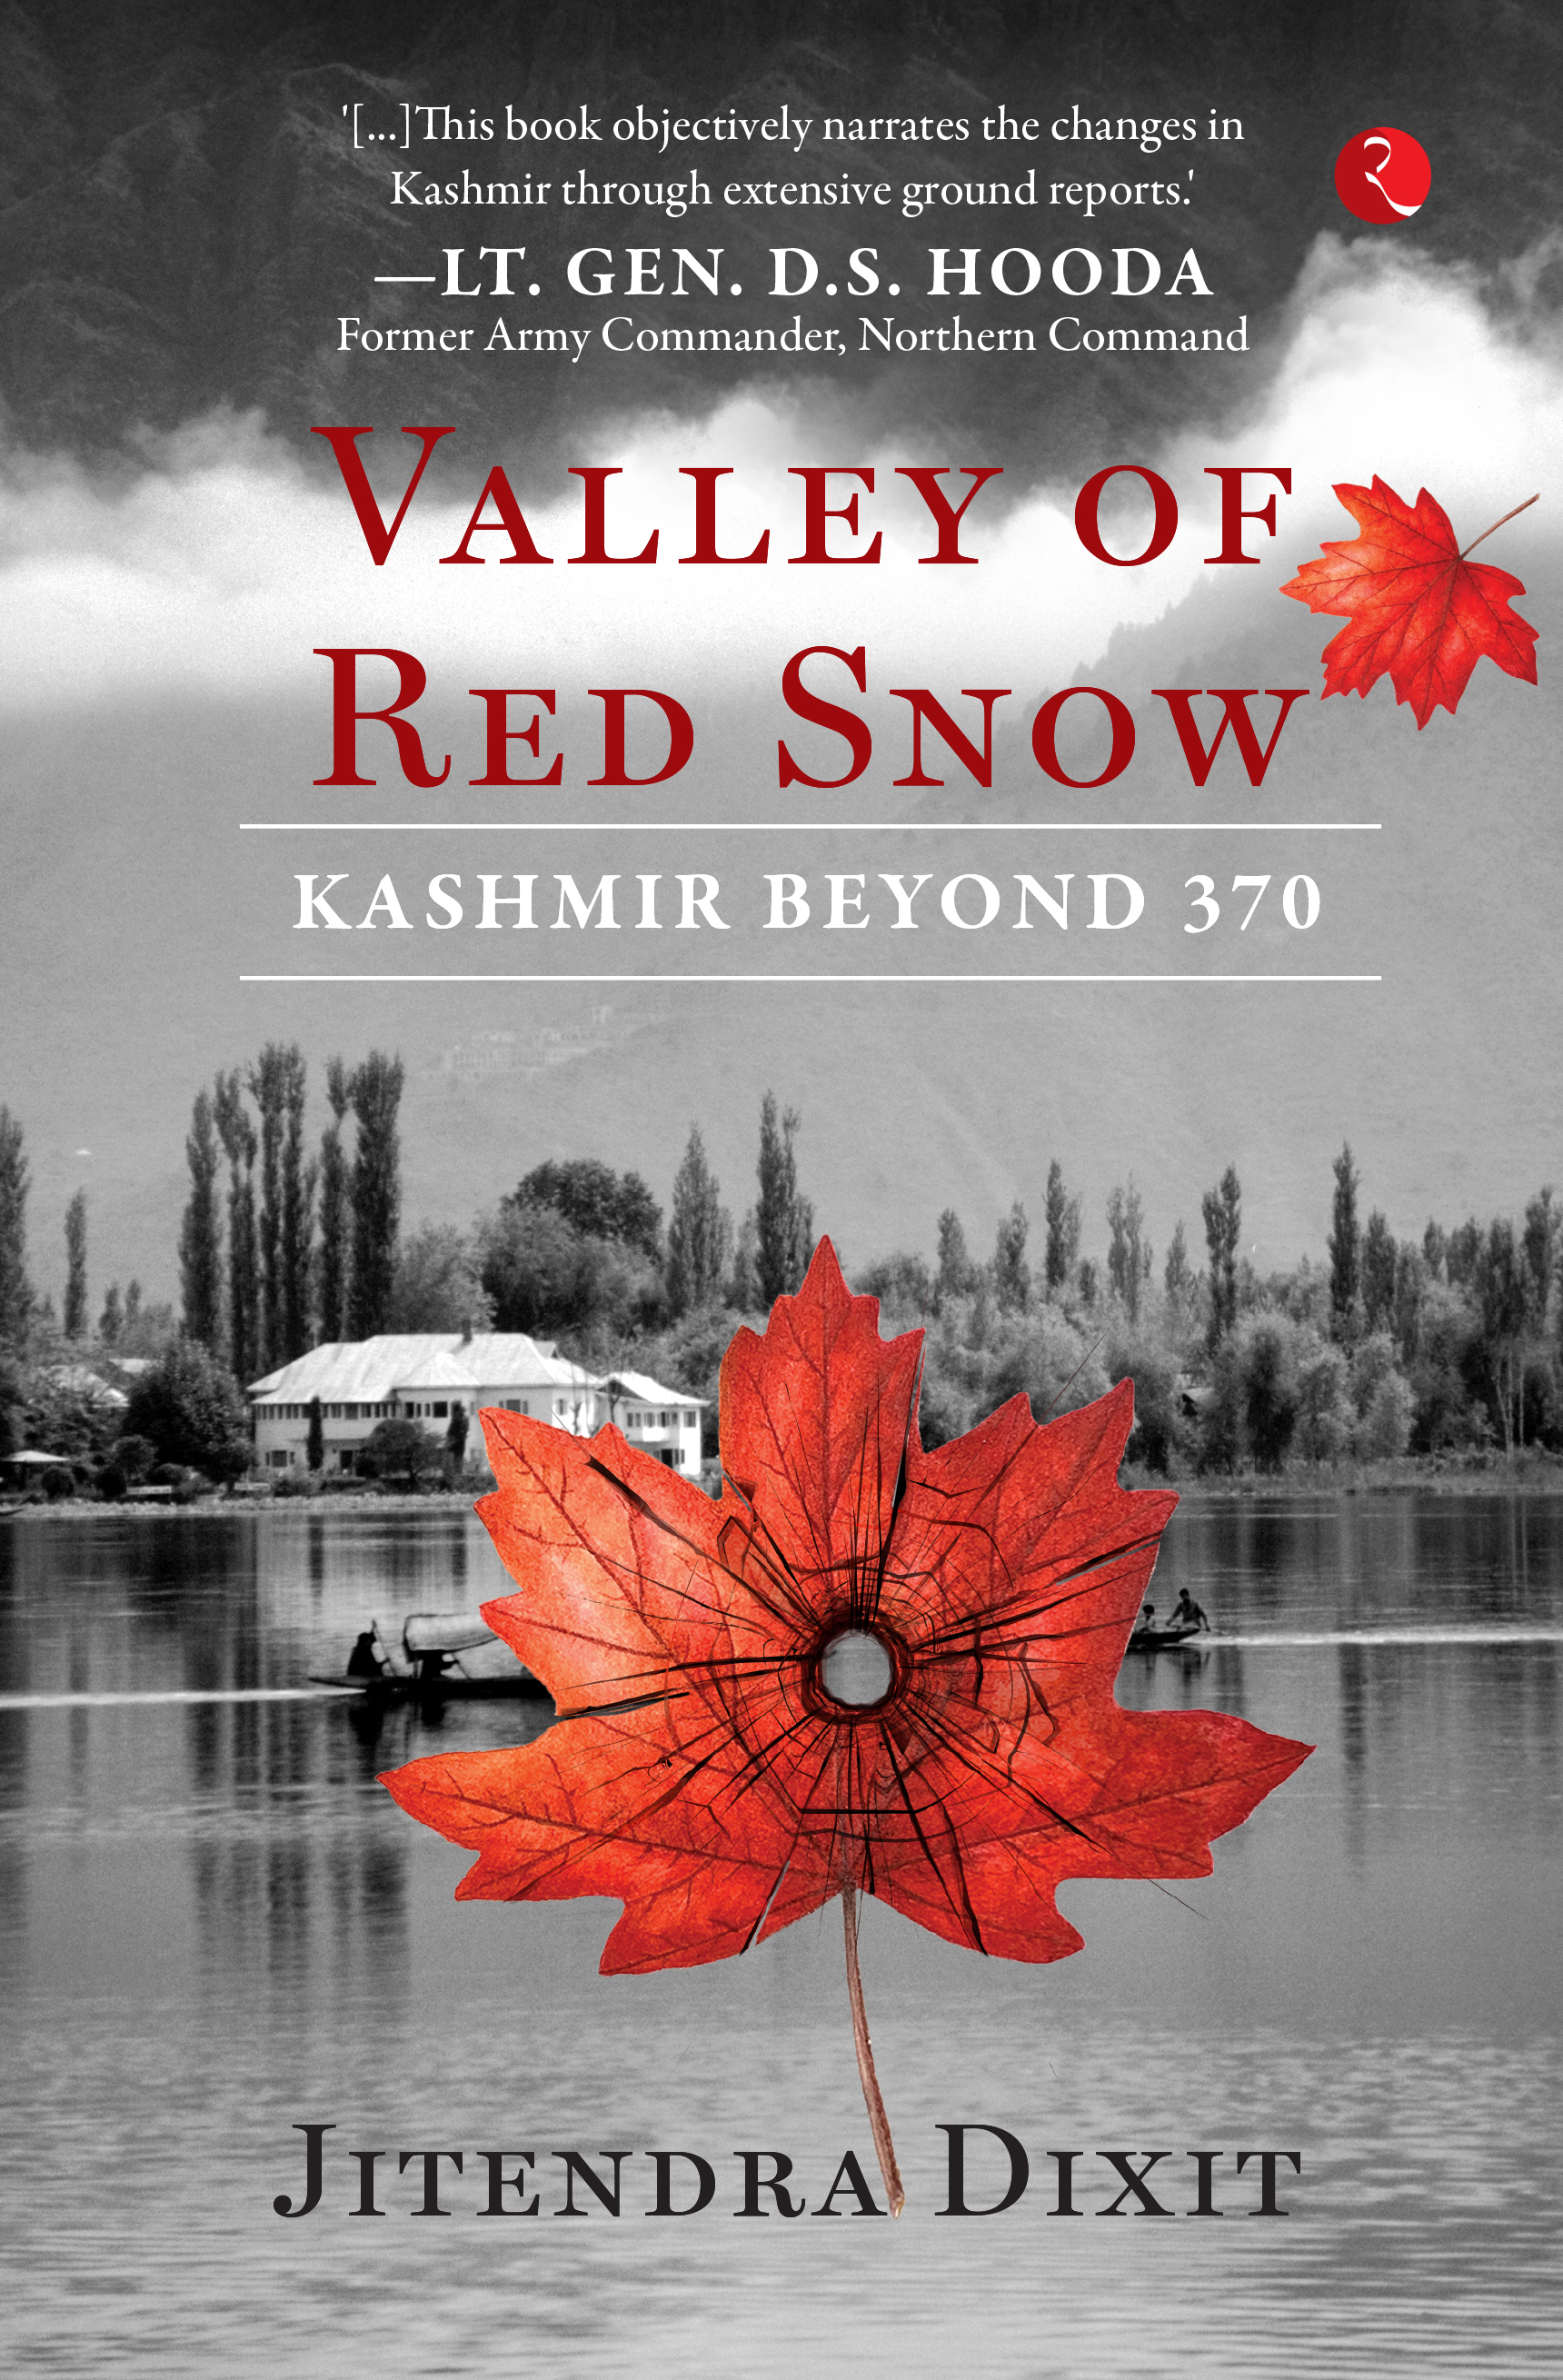 Jitendra Dixit’s Valley of Red Snow chronicles the making of ‘New Kashmir’